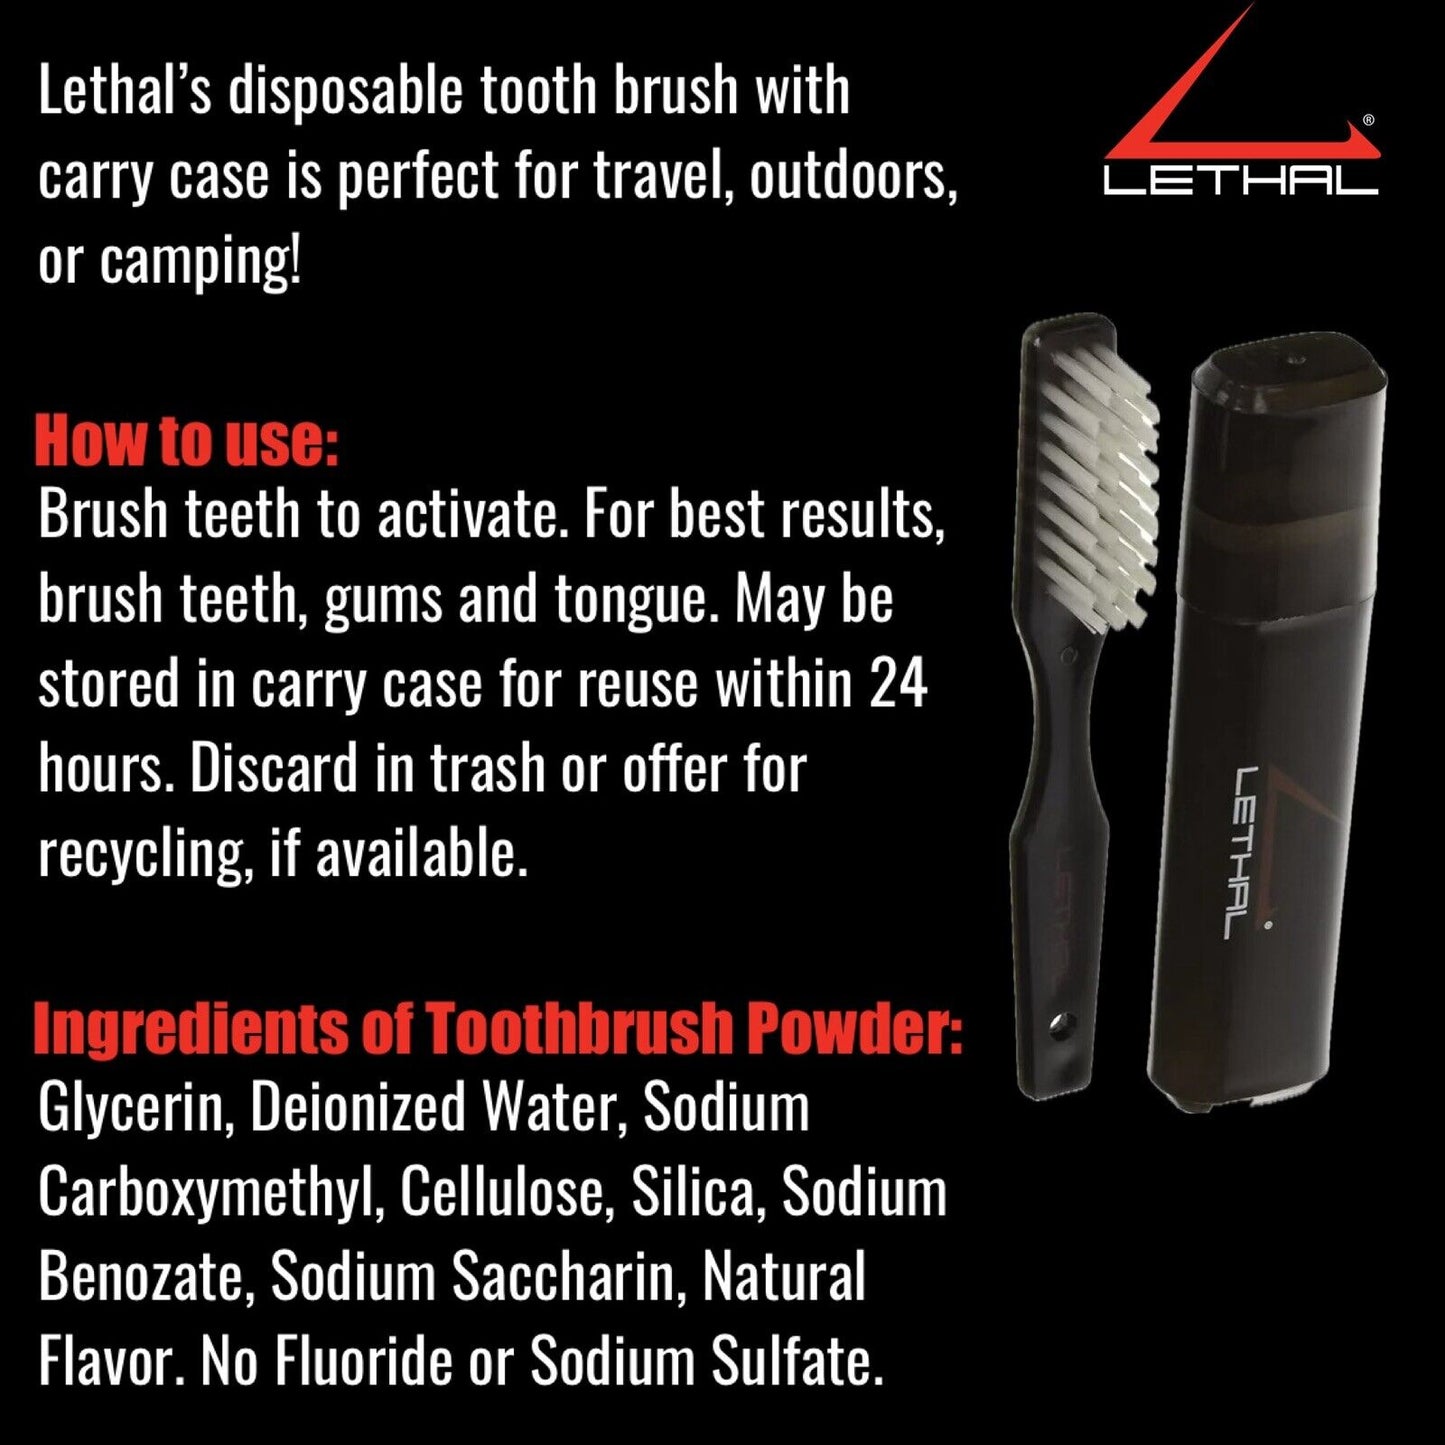 Lethal Hunting Prepasted Field Toothbrush and Carry Case 4-Pack